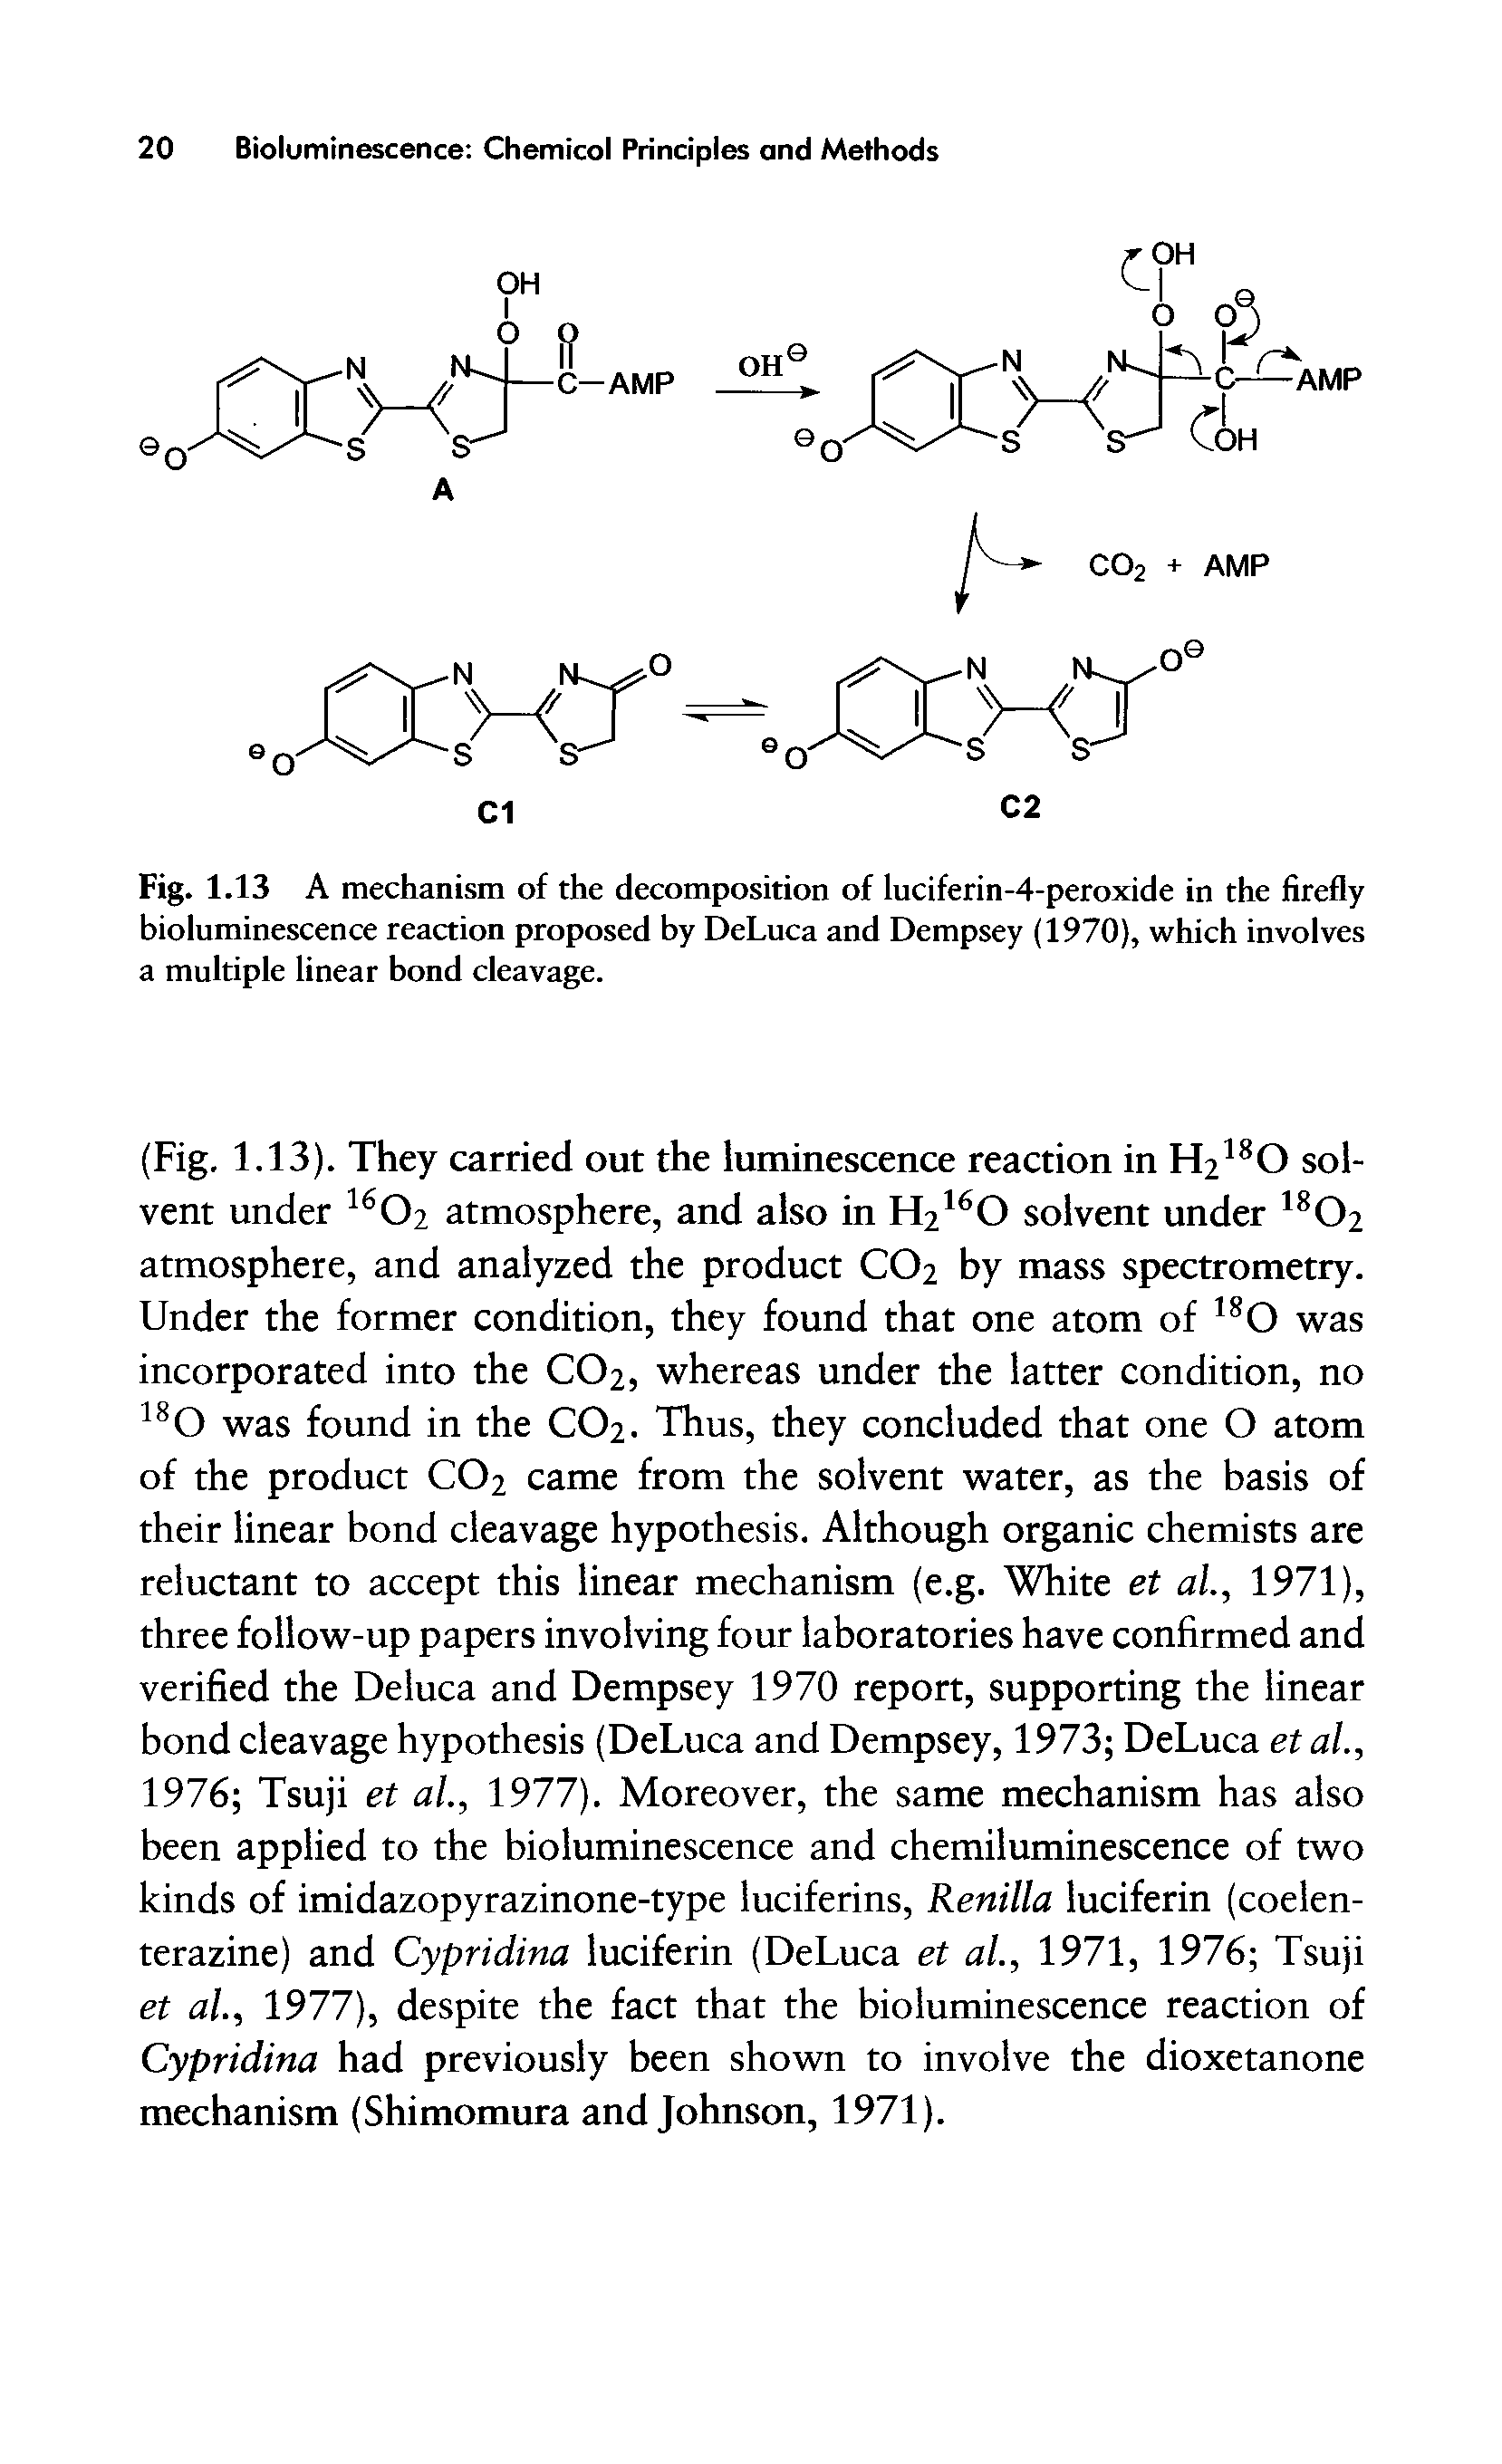 Fig. 1.13 A mechanism of the decomposition of luciferin-4-peroxide in the firefly bioluminescence reaction proposed by DeLuca and Dempsey (1970), which involves a multiple linear bond cleavage.